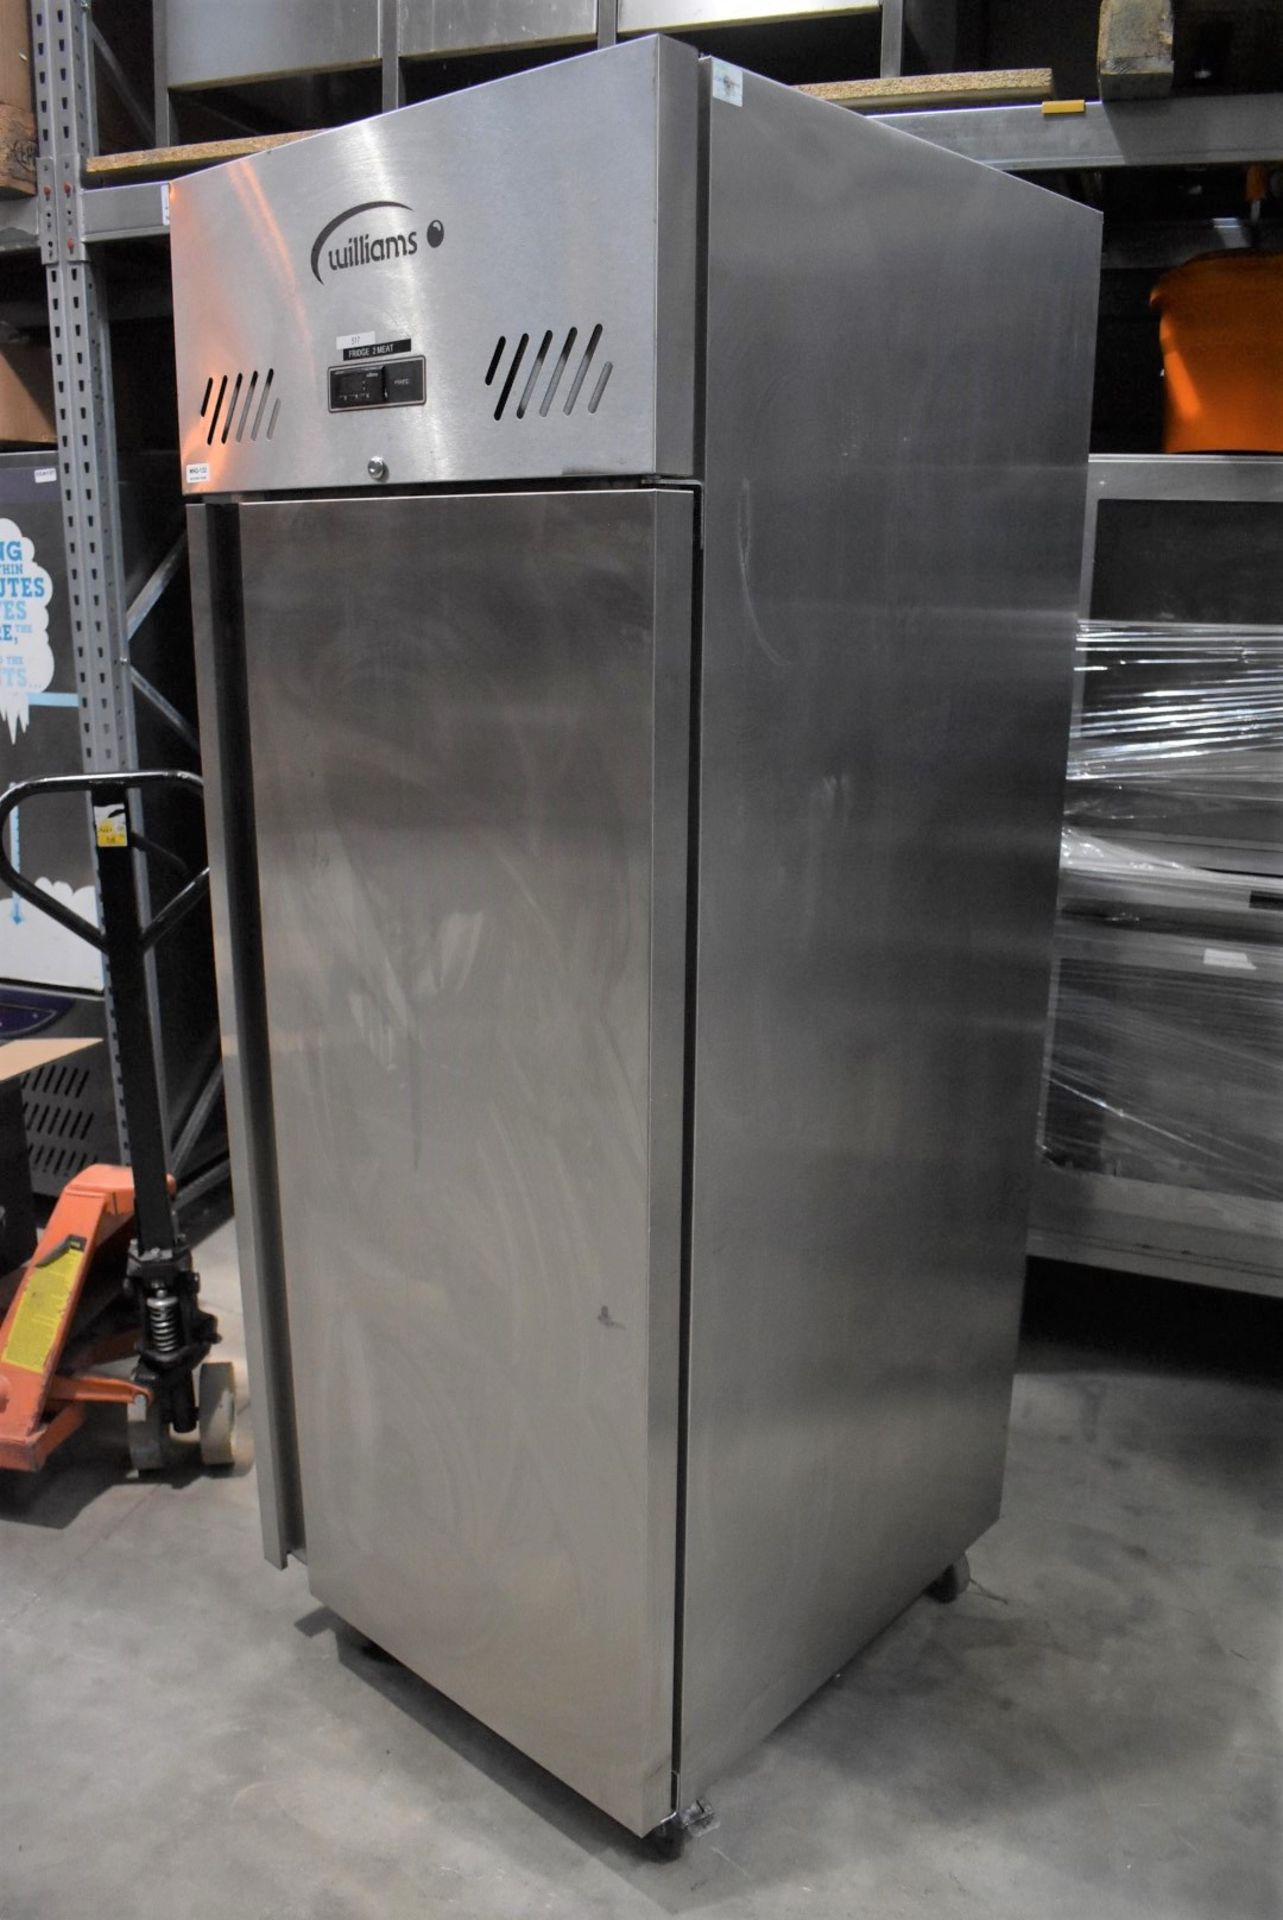 1 x Williams Upright Single Door Refrigerator With Stainless Steel Exterior - Model HS1SA - Recently - Image 2 of 12